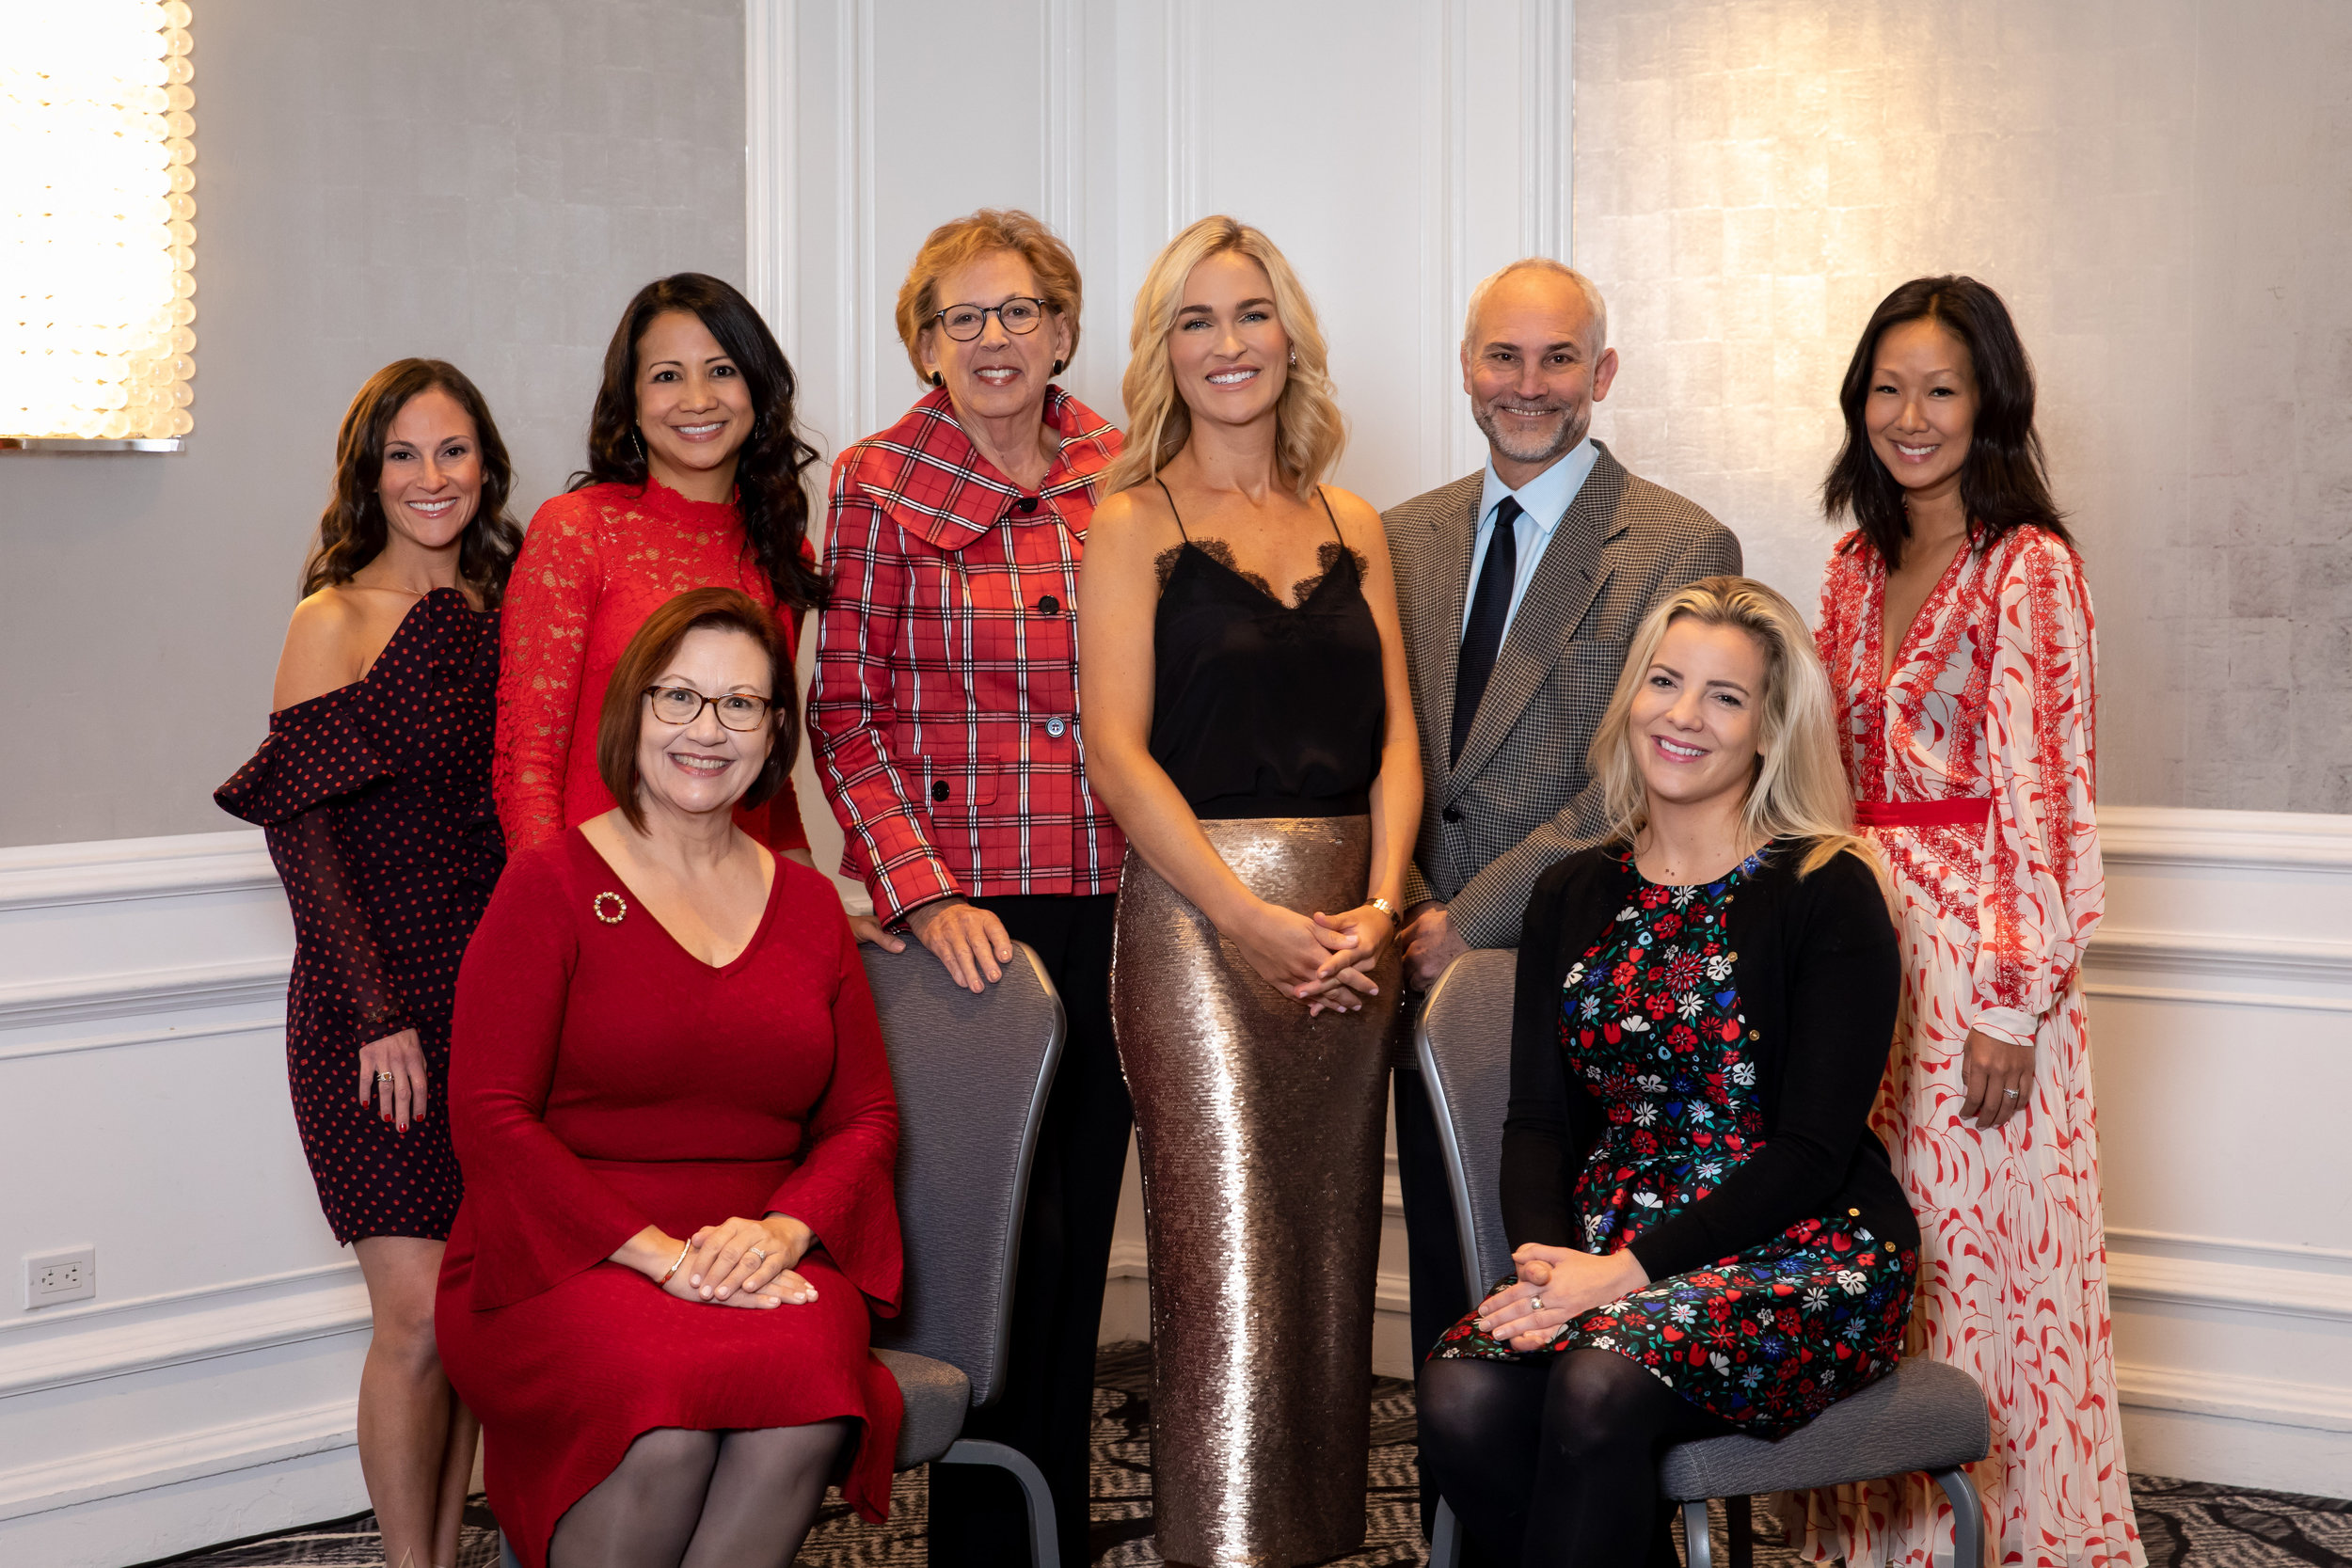 019_Catherine Hall Studios_CHG Holiday Boutique and Luncheon December 2018.jpg